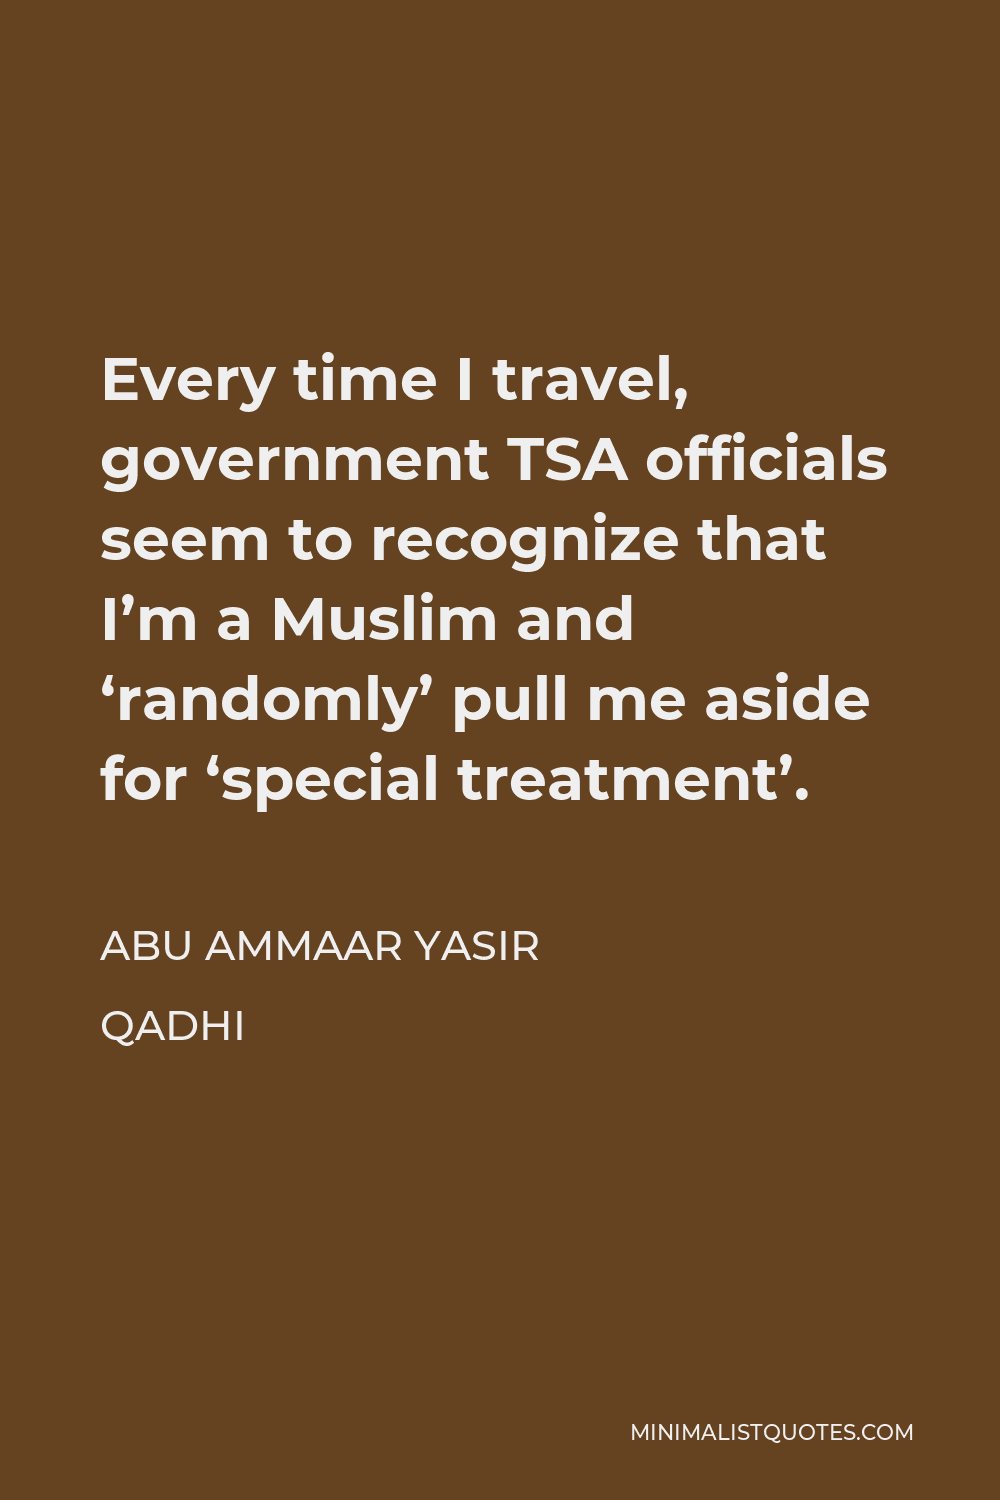 Abu Ammaar Yasir Qadhi Quote - Every time I travel, government TSA officials seem to recognize that I’m a Muslim and ‘randomly’ pull me aside for ‘special treatment’.